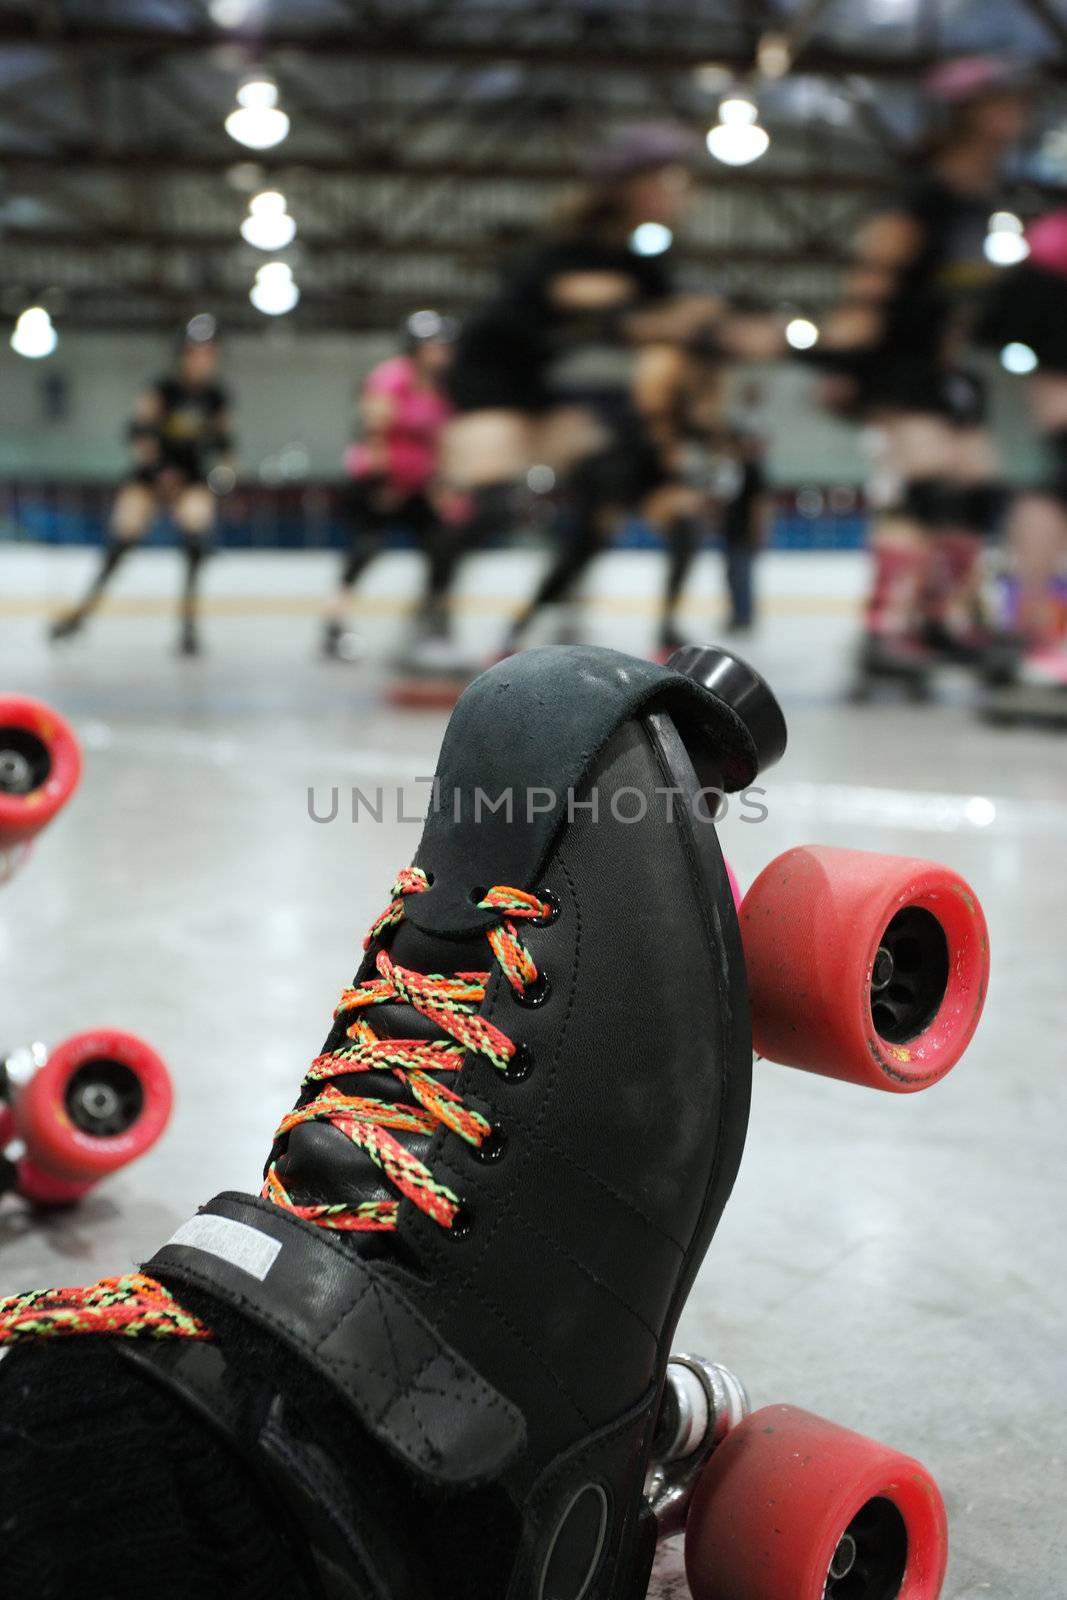 An abstract image of the roller-skates of a fallen skater as her teammates in the background continue to skate around the track of the roller derby.
